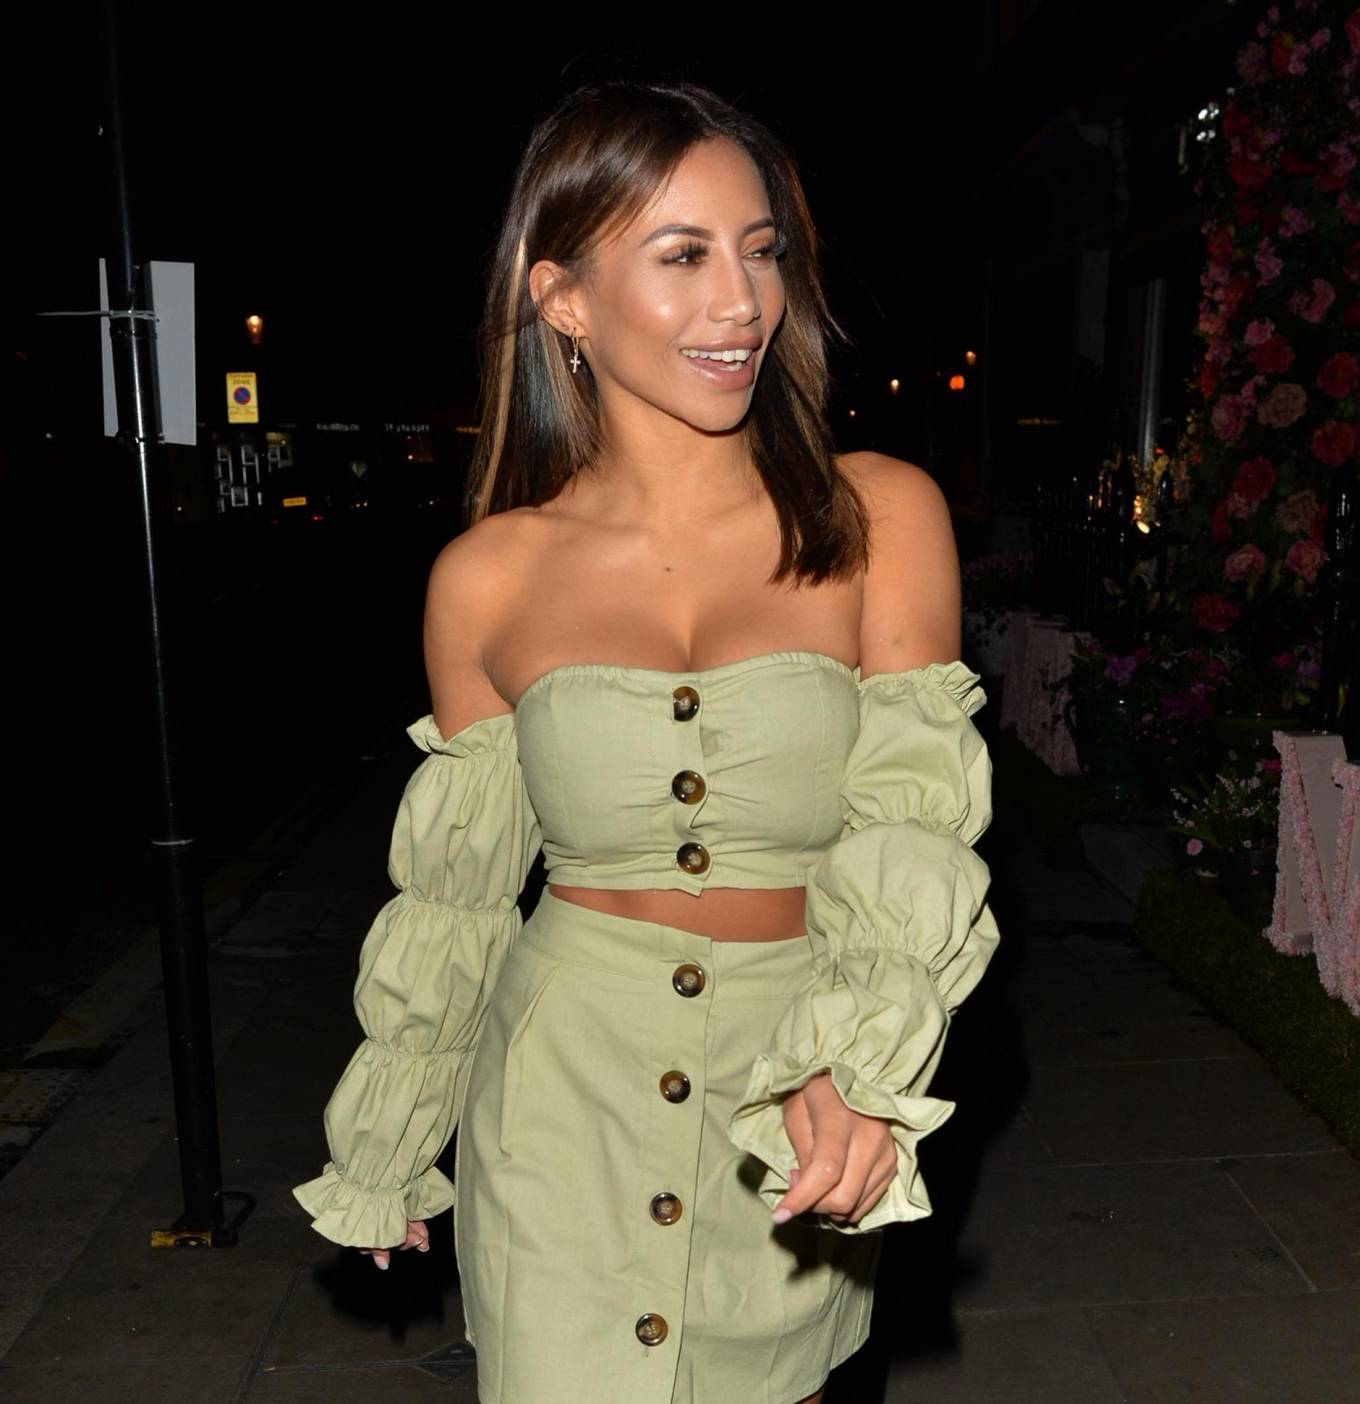 Kayleigh Morris 2020 : Kayleigh Morris – Looking chic while night out in London-02